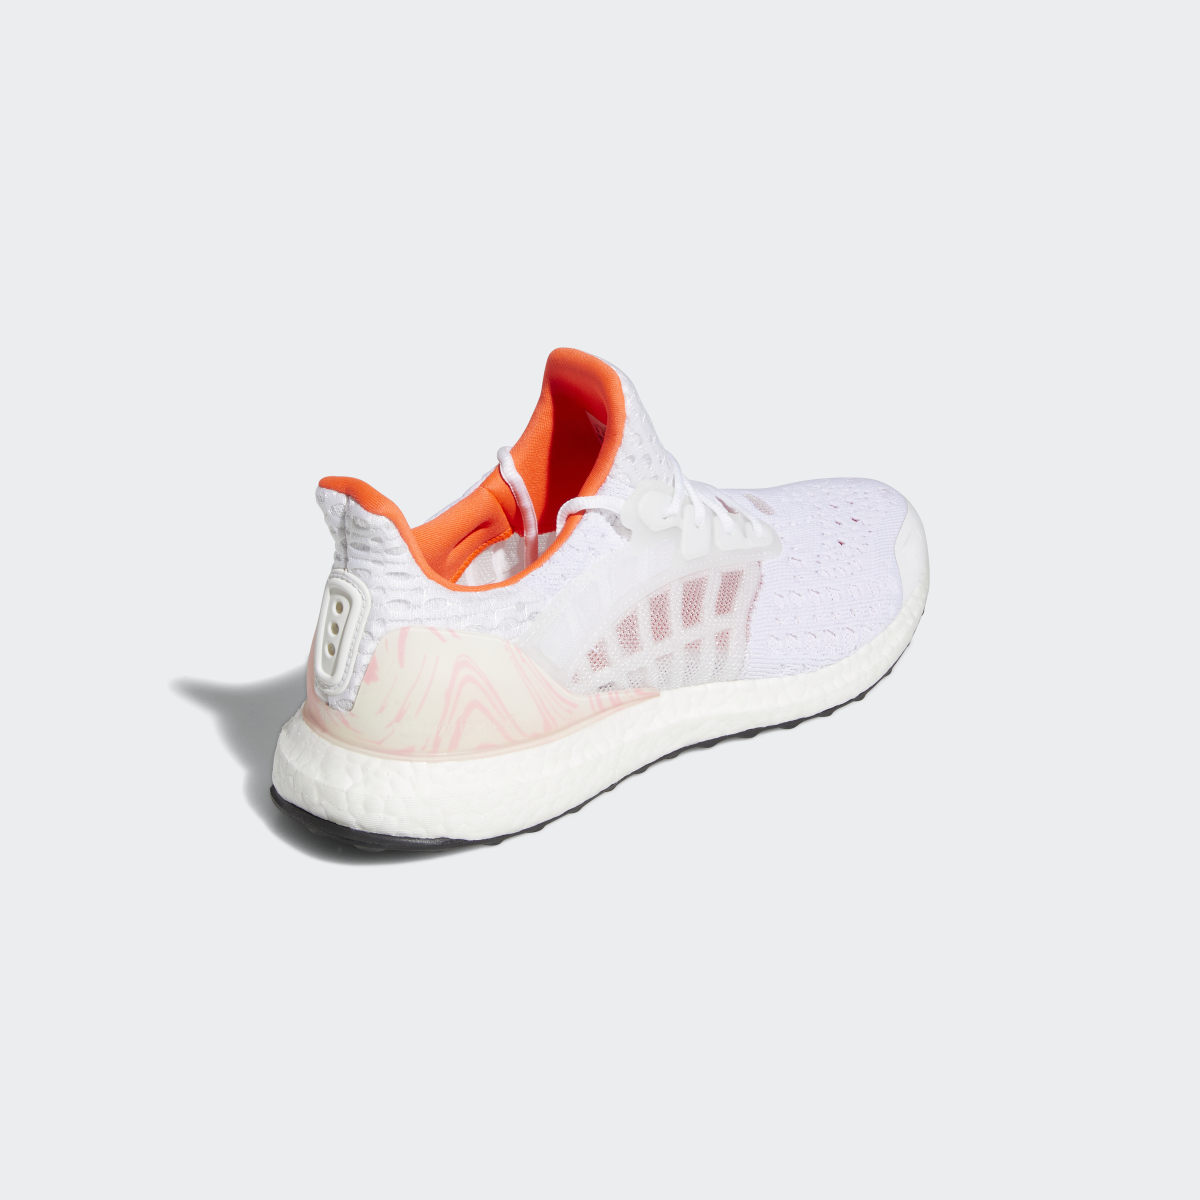 Adidas Chaussure Ultraboost CC_2 DNA Climacool Running Sportswear Lifestyle. 9